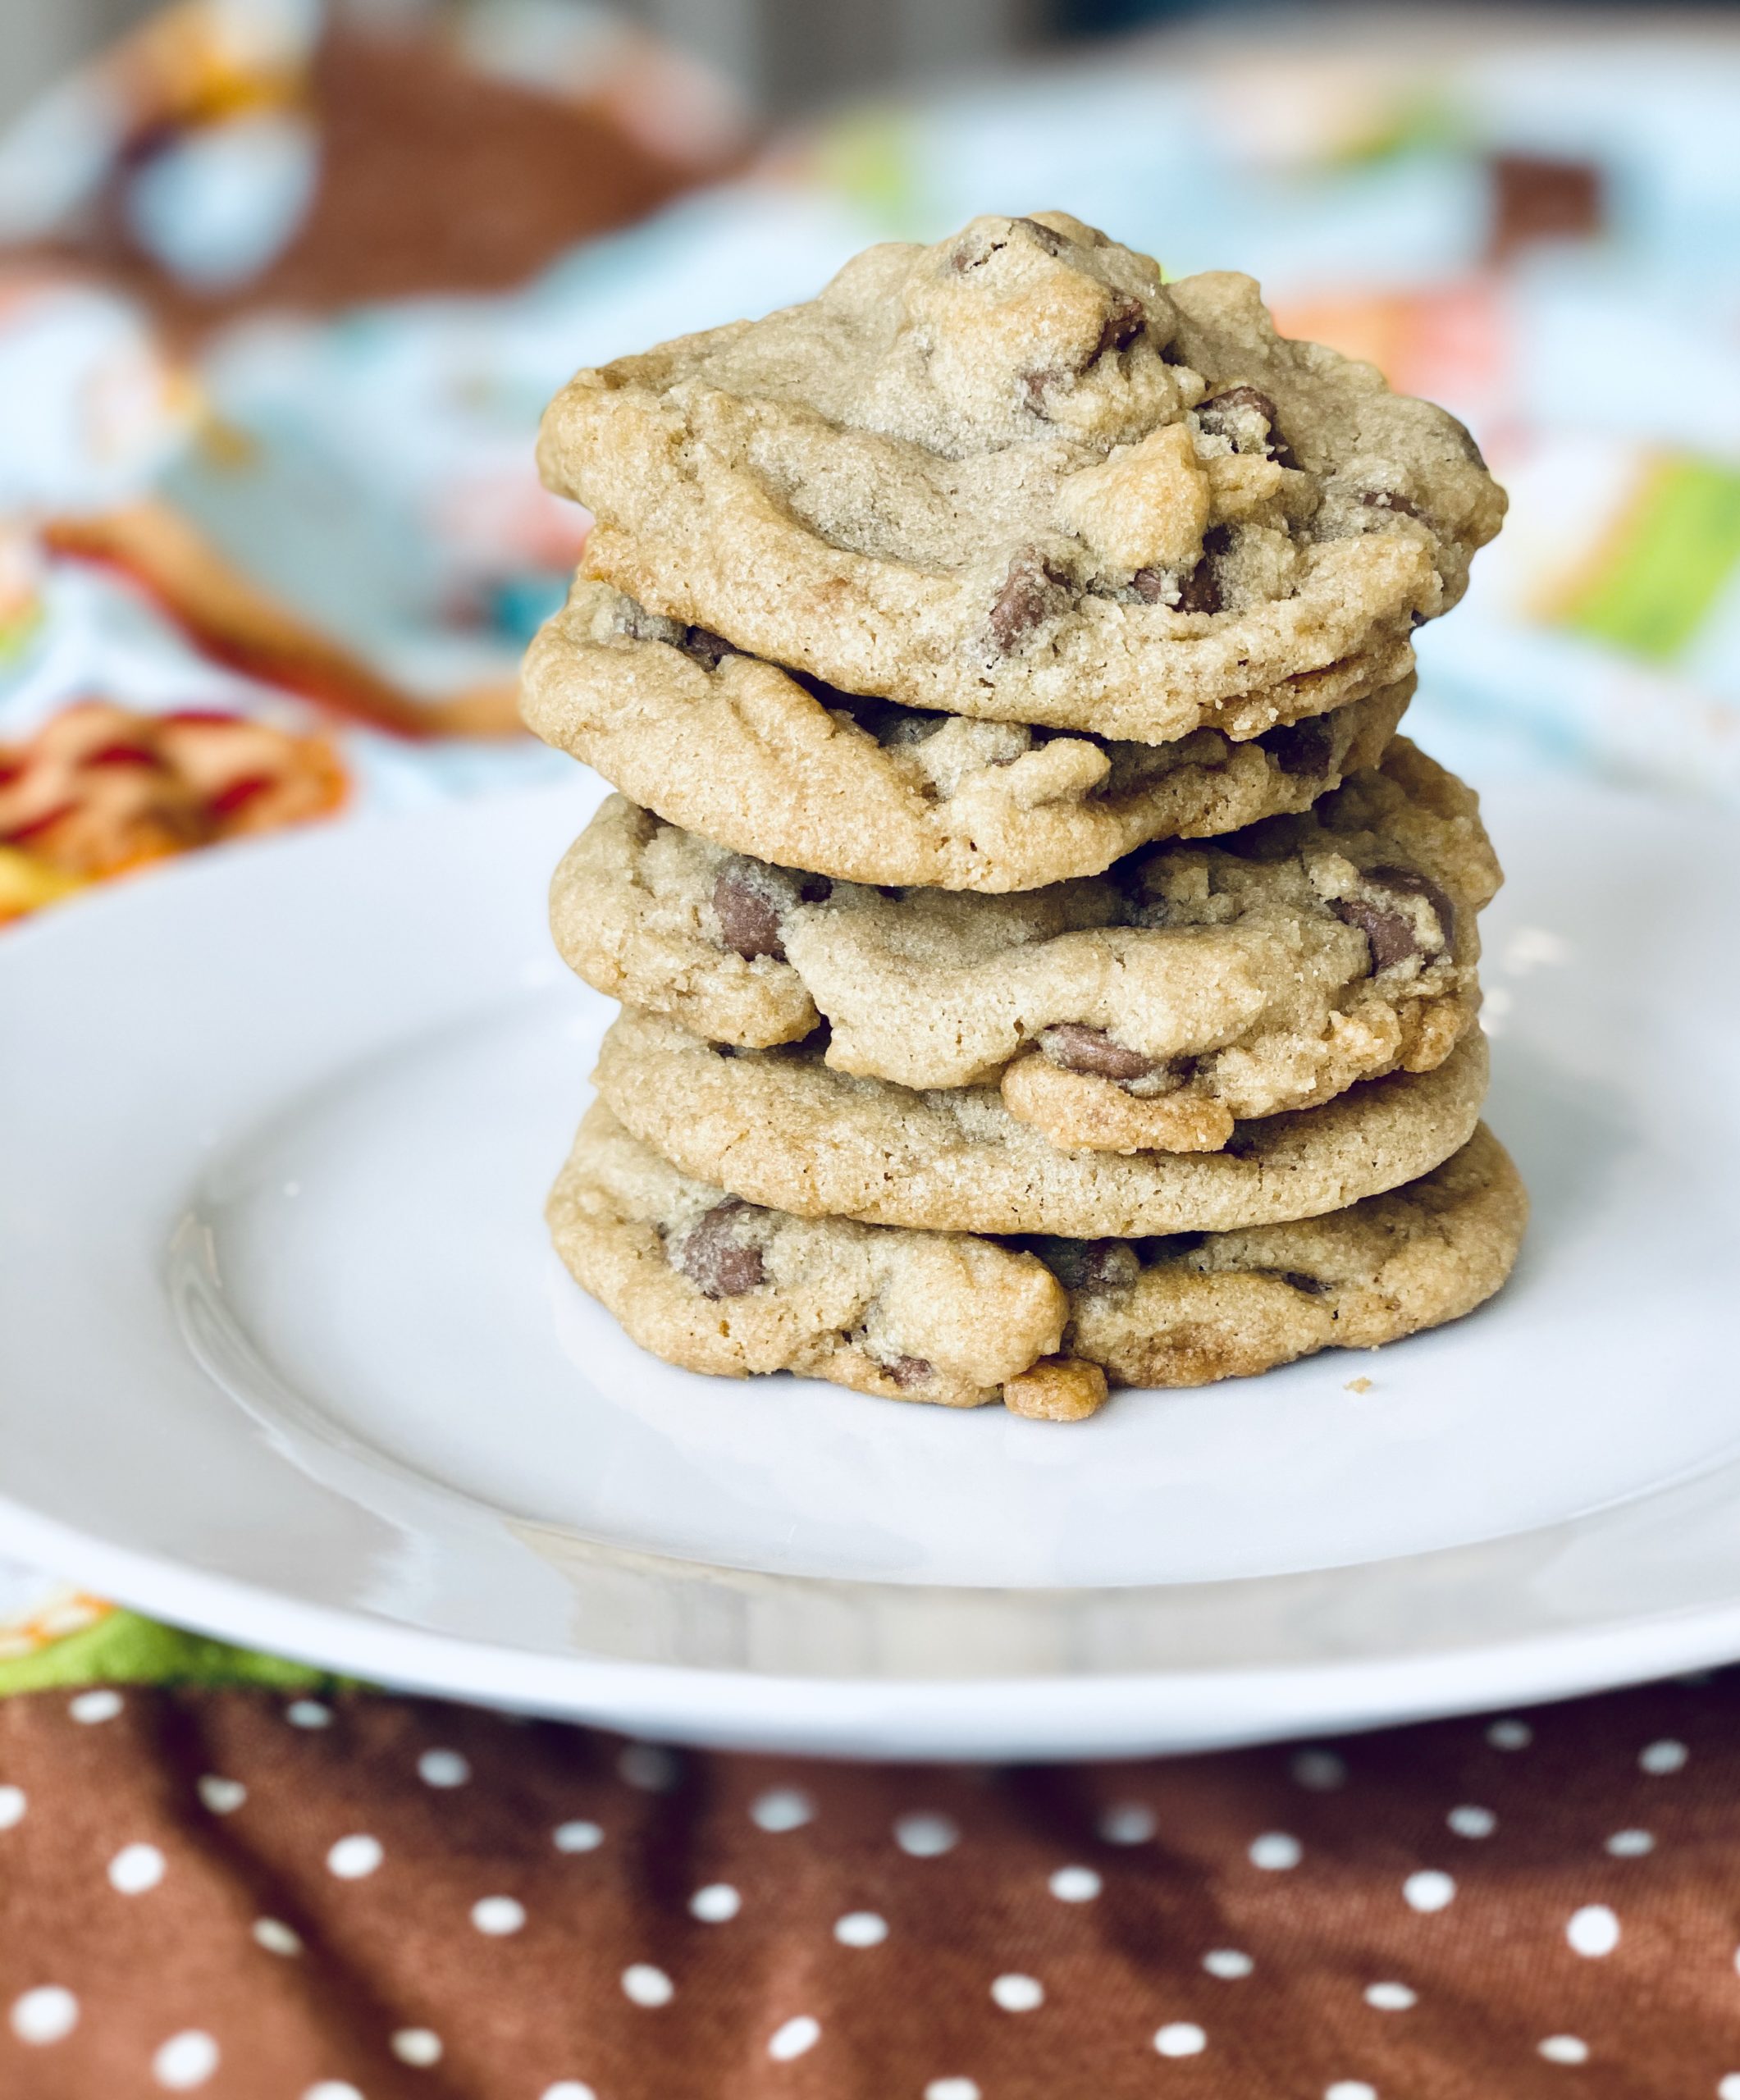 Simple Egg-Free Chocolate Chip Cookies